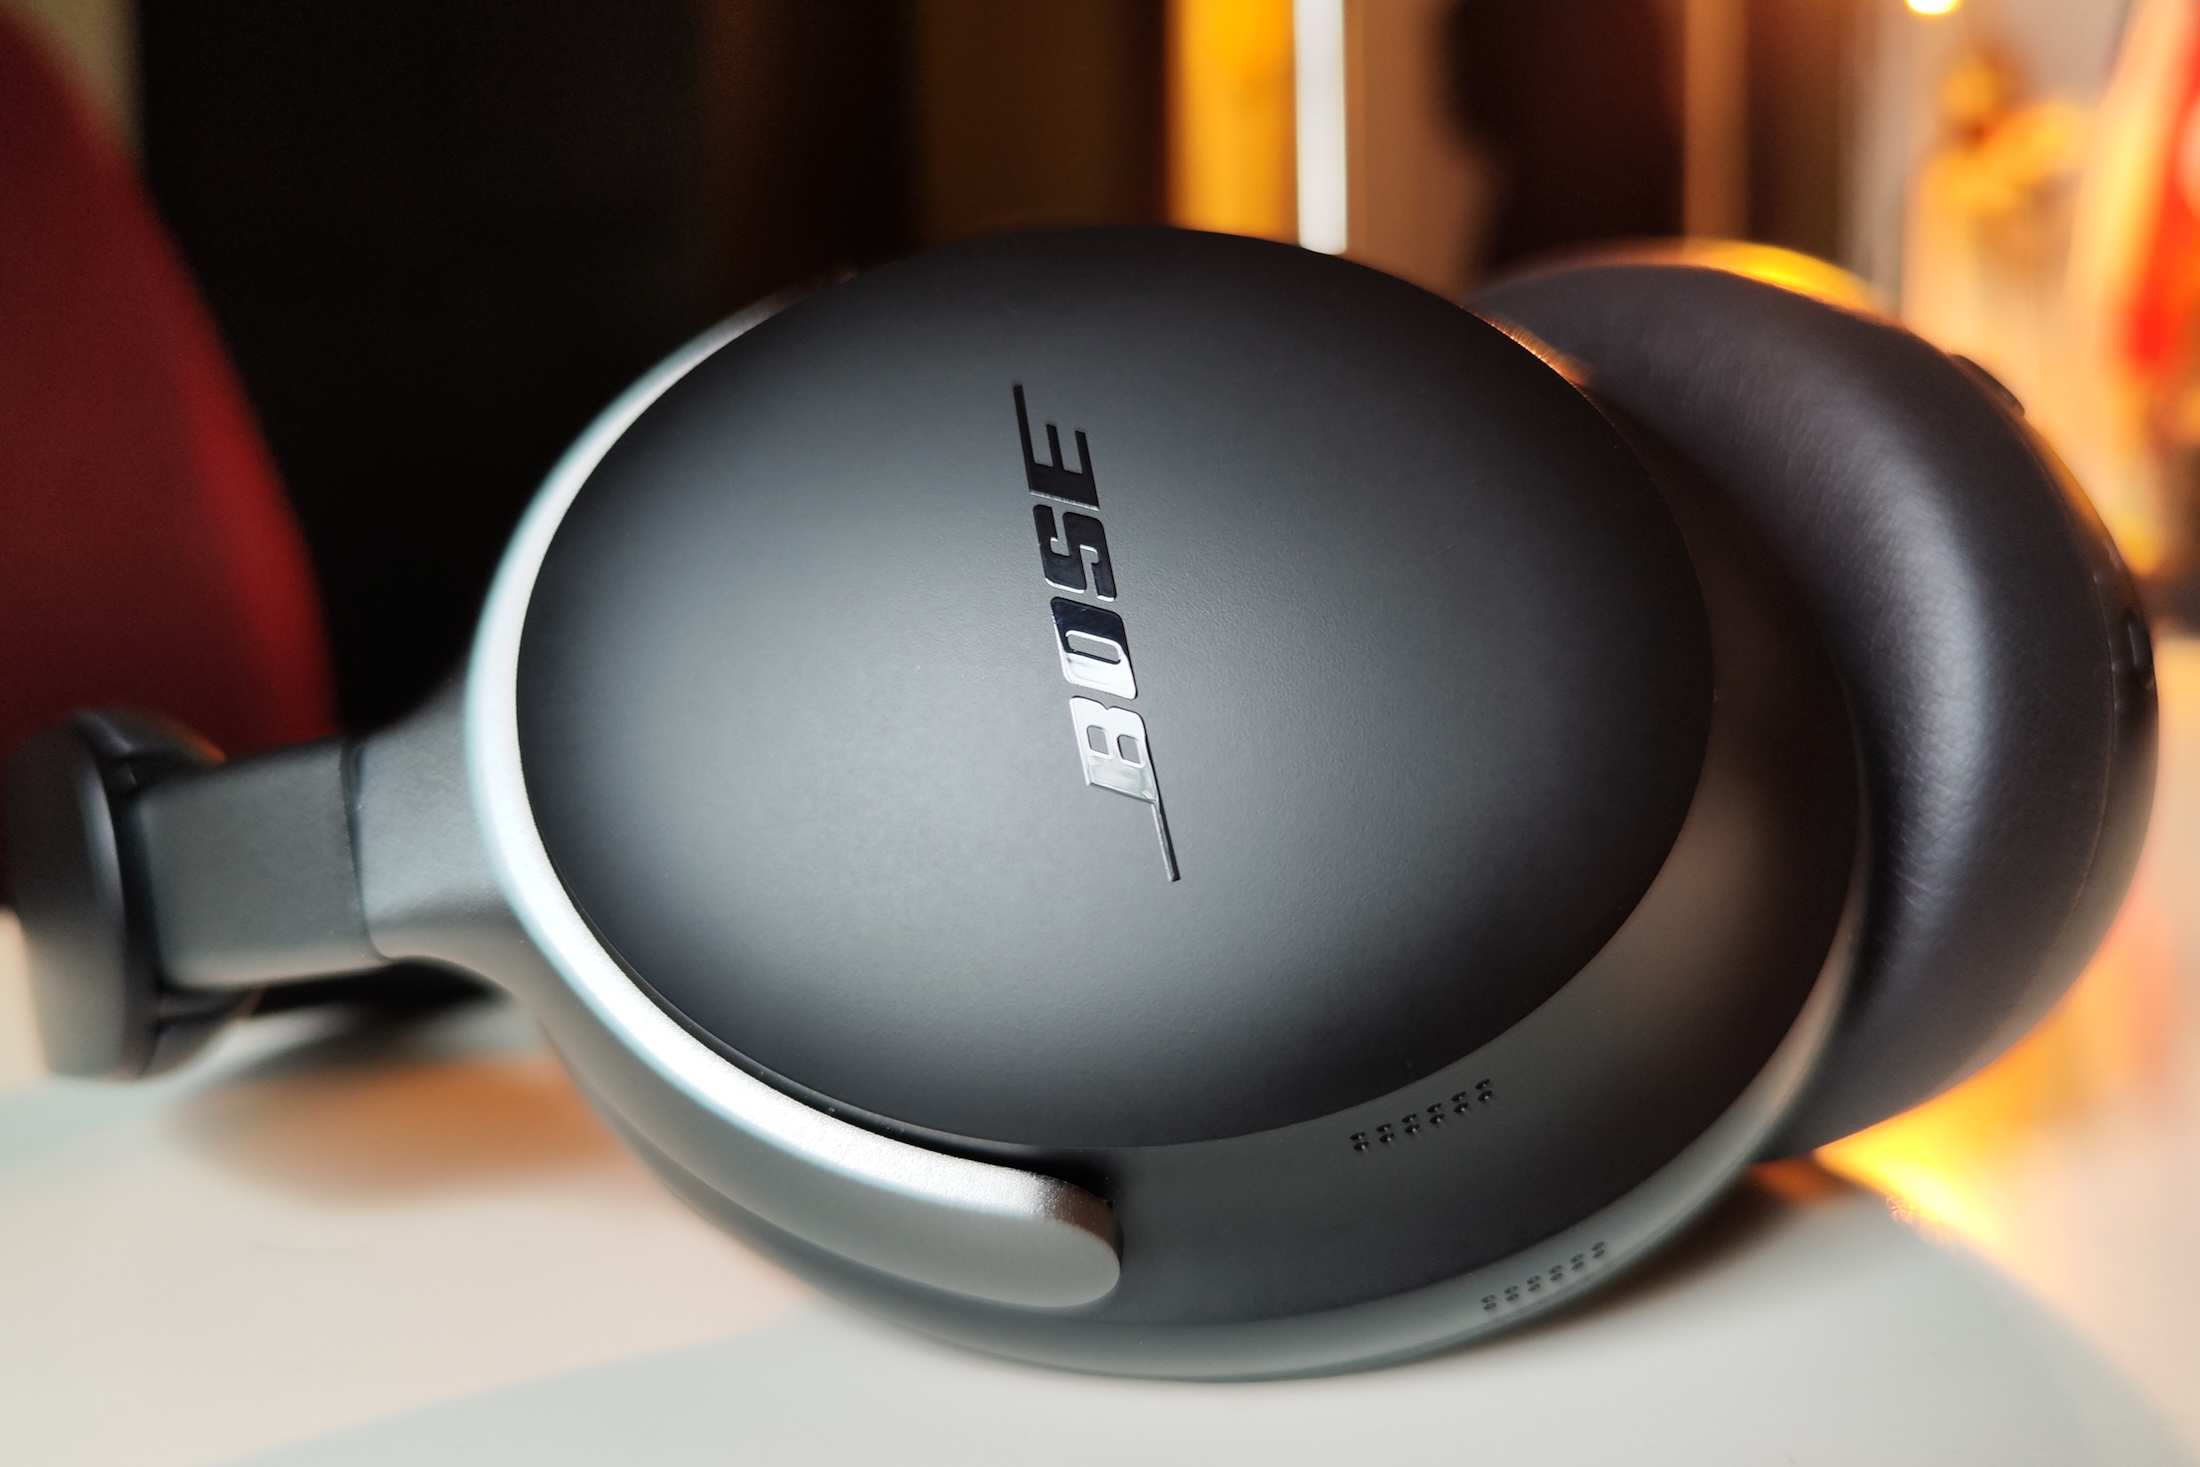 Are These $350 Bose Headphones Worth It?